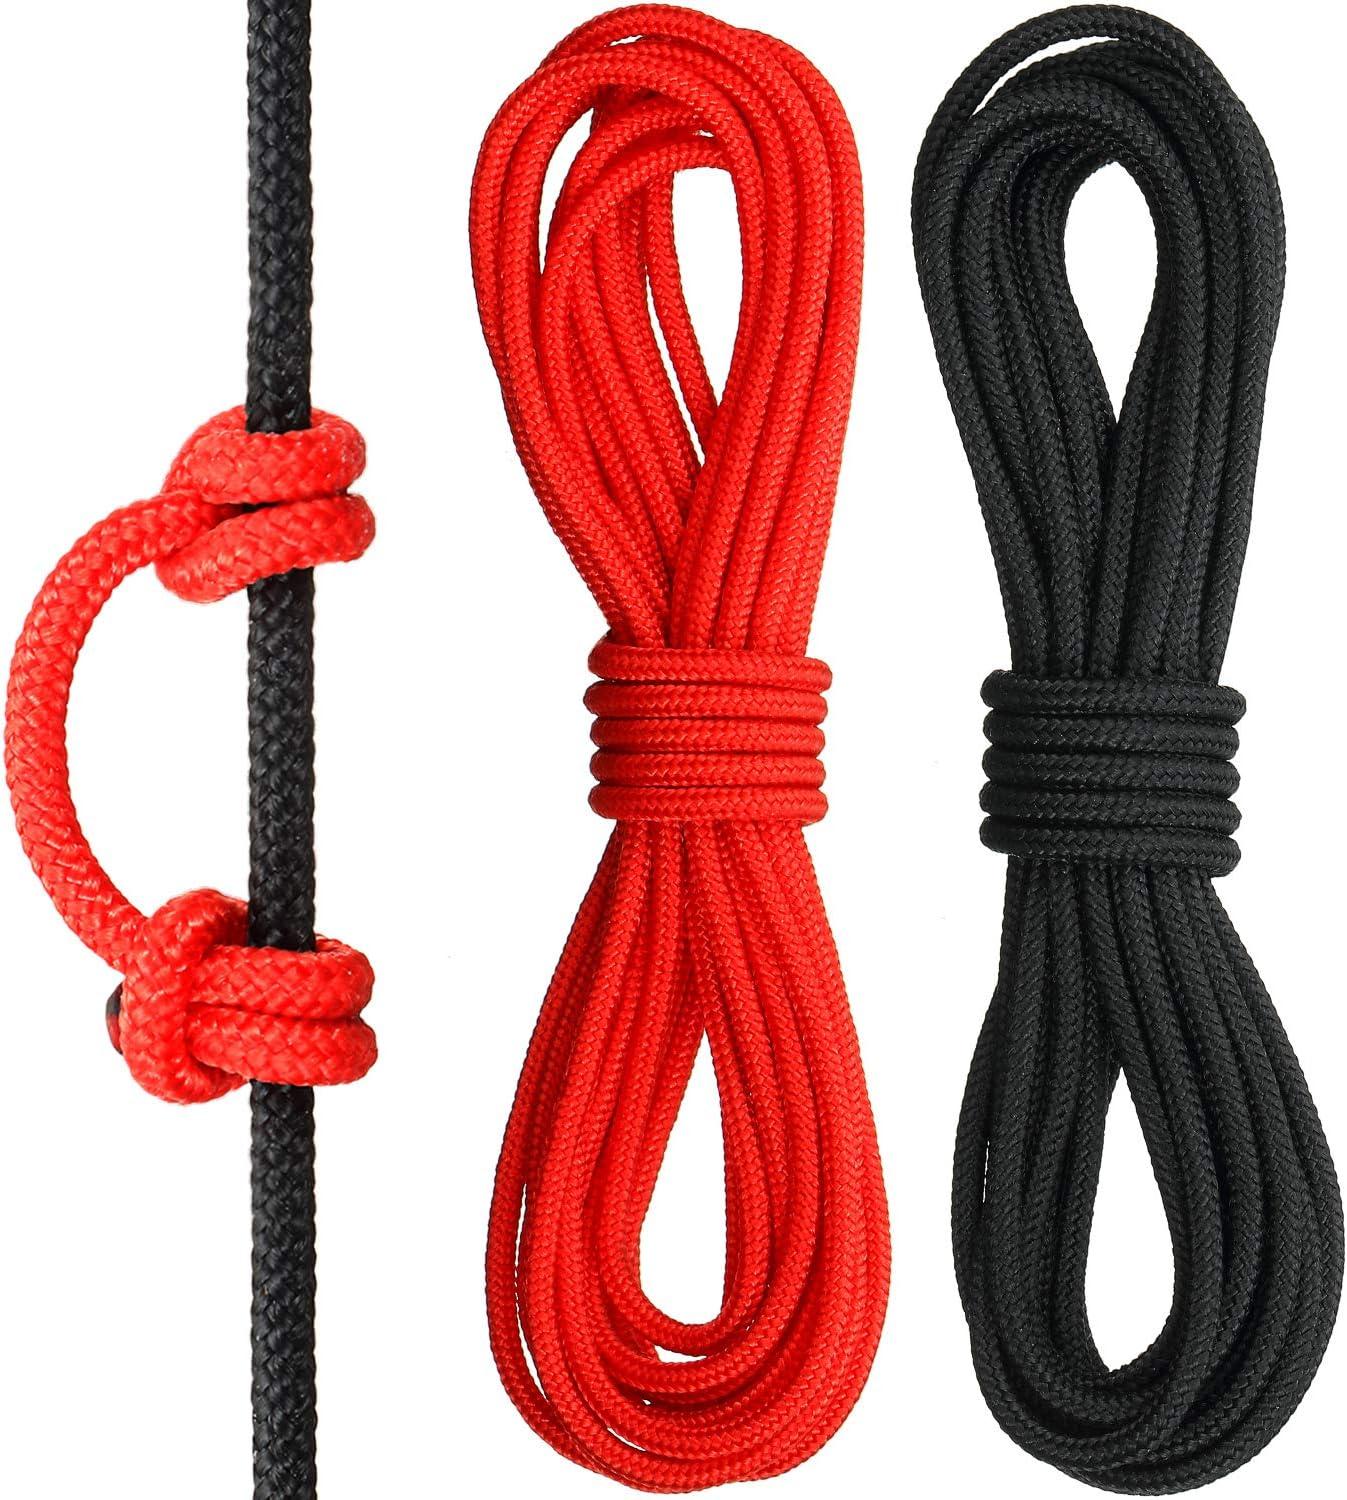 2 Pieces Archery D Loop Rope 10 Feet Archery Bowstring Serving Thread D  Loop Rope Release Material Nocking D Loop Rope String Black and Red